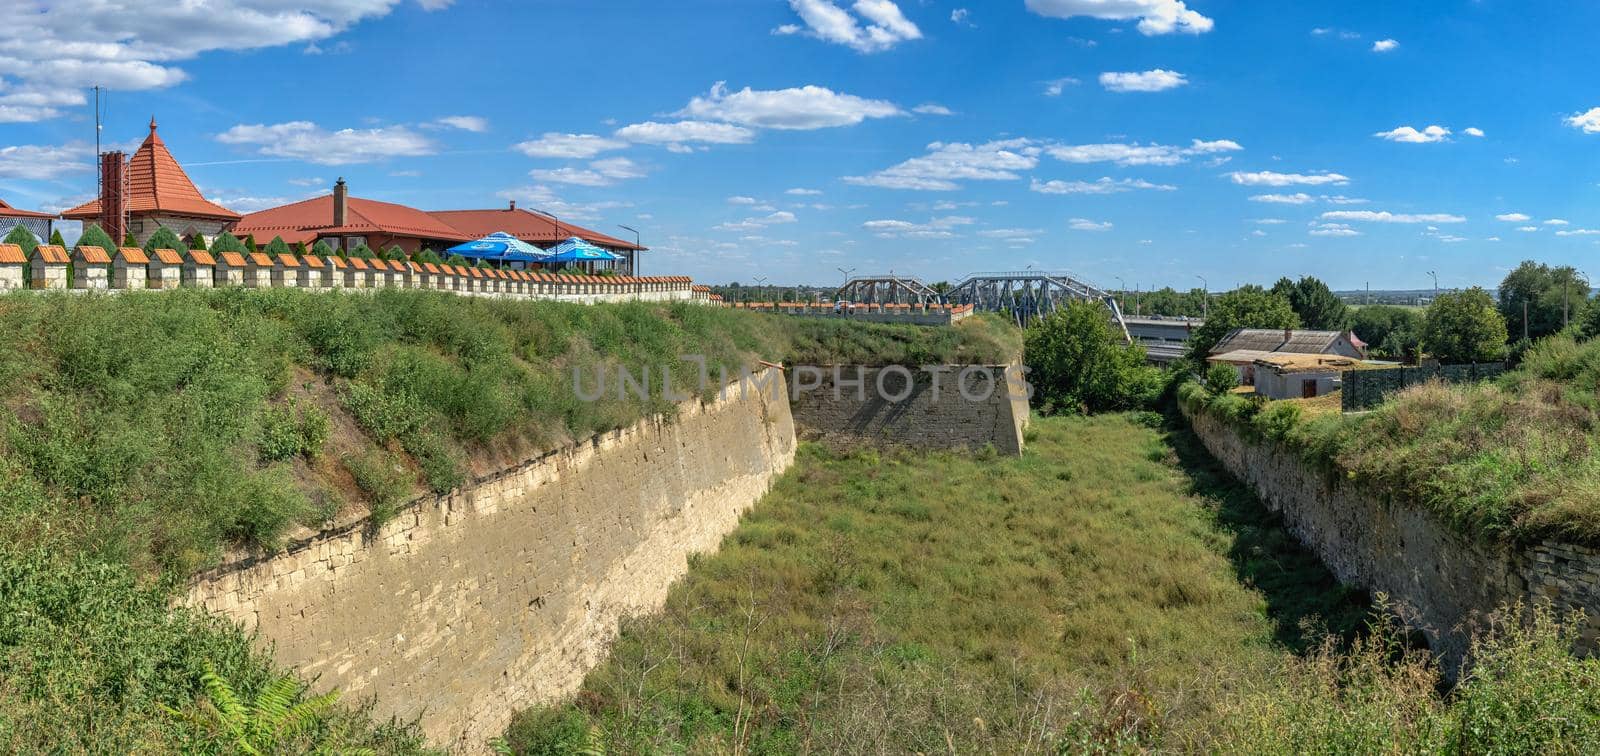 Shaft and moat of the Fortress in Bender, Moldova by Multipedia